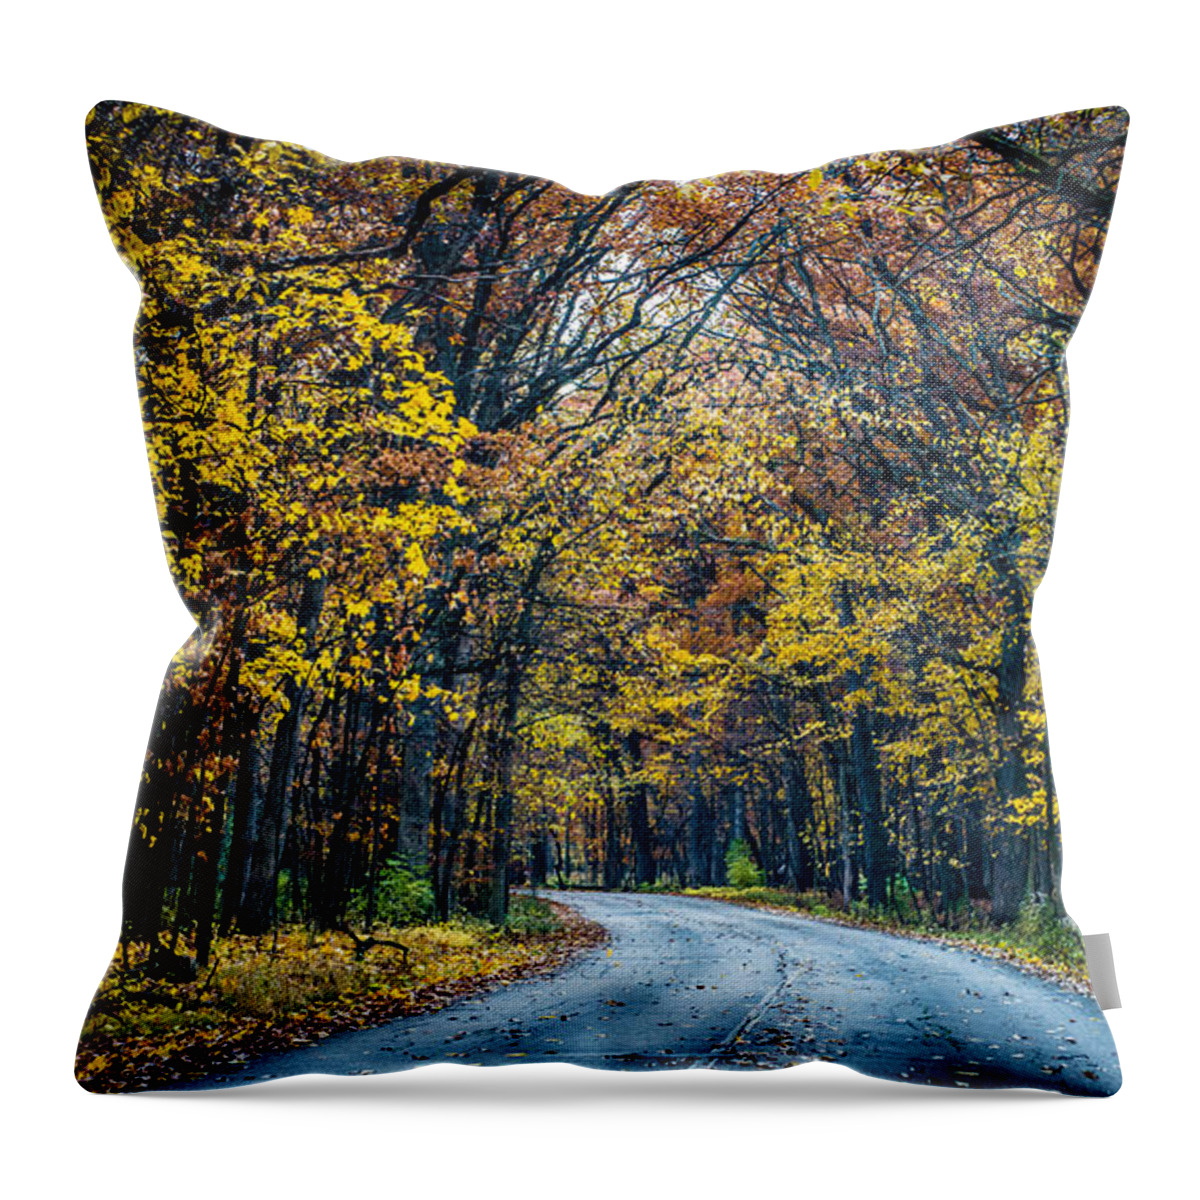 Road Throw Pillow featuring the photograph Golden Road by David Downs